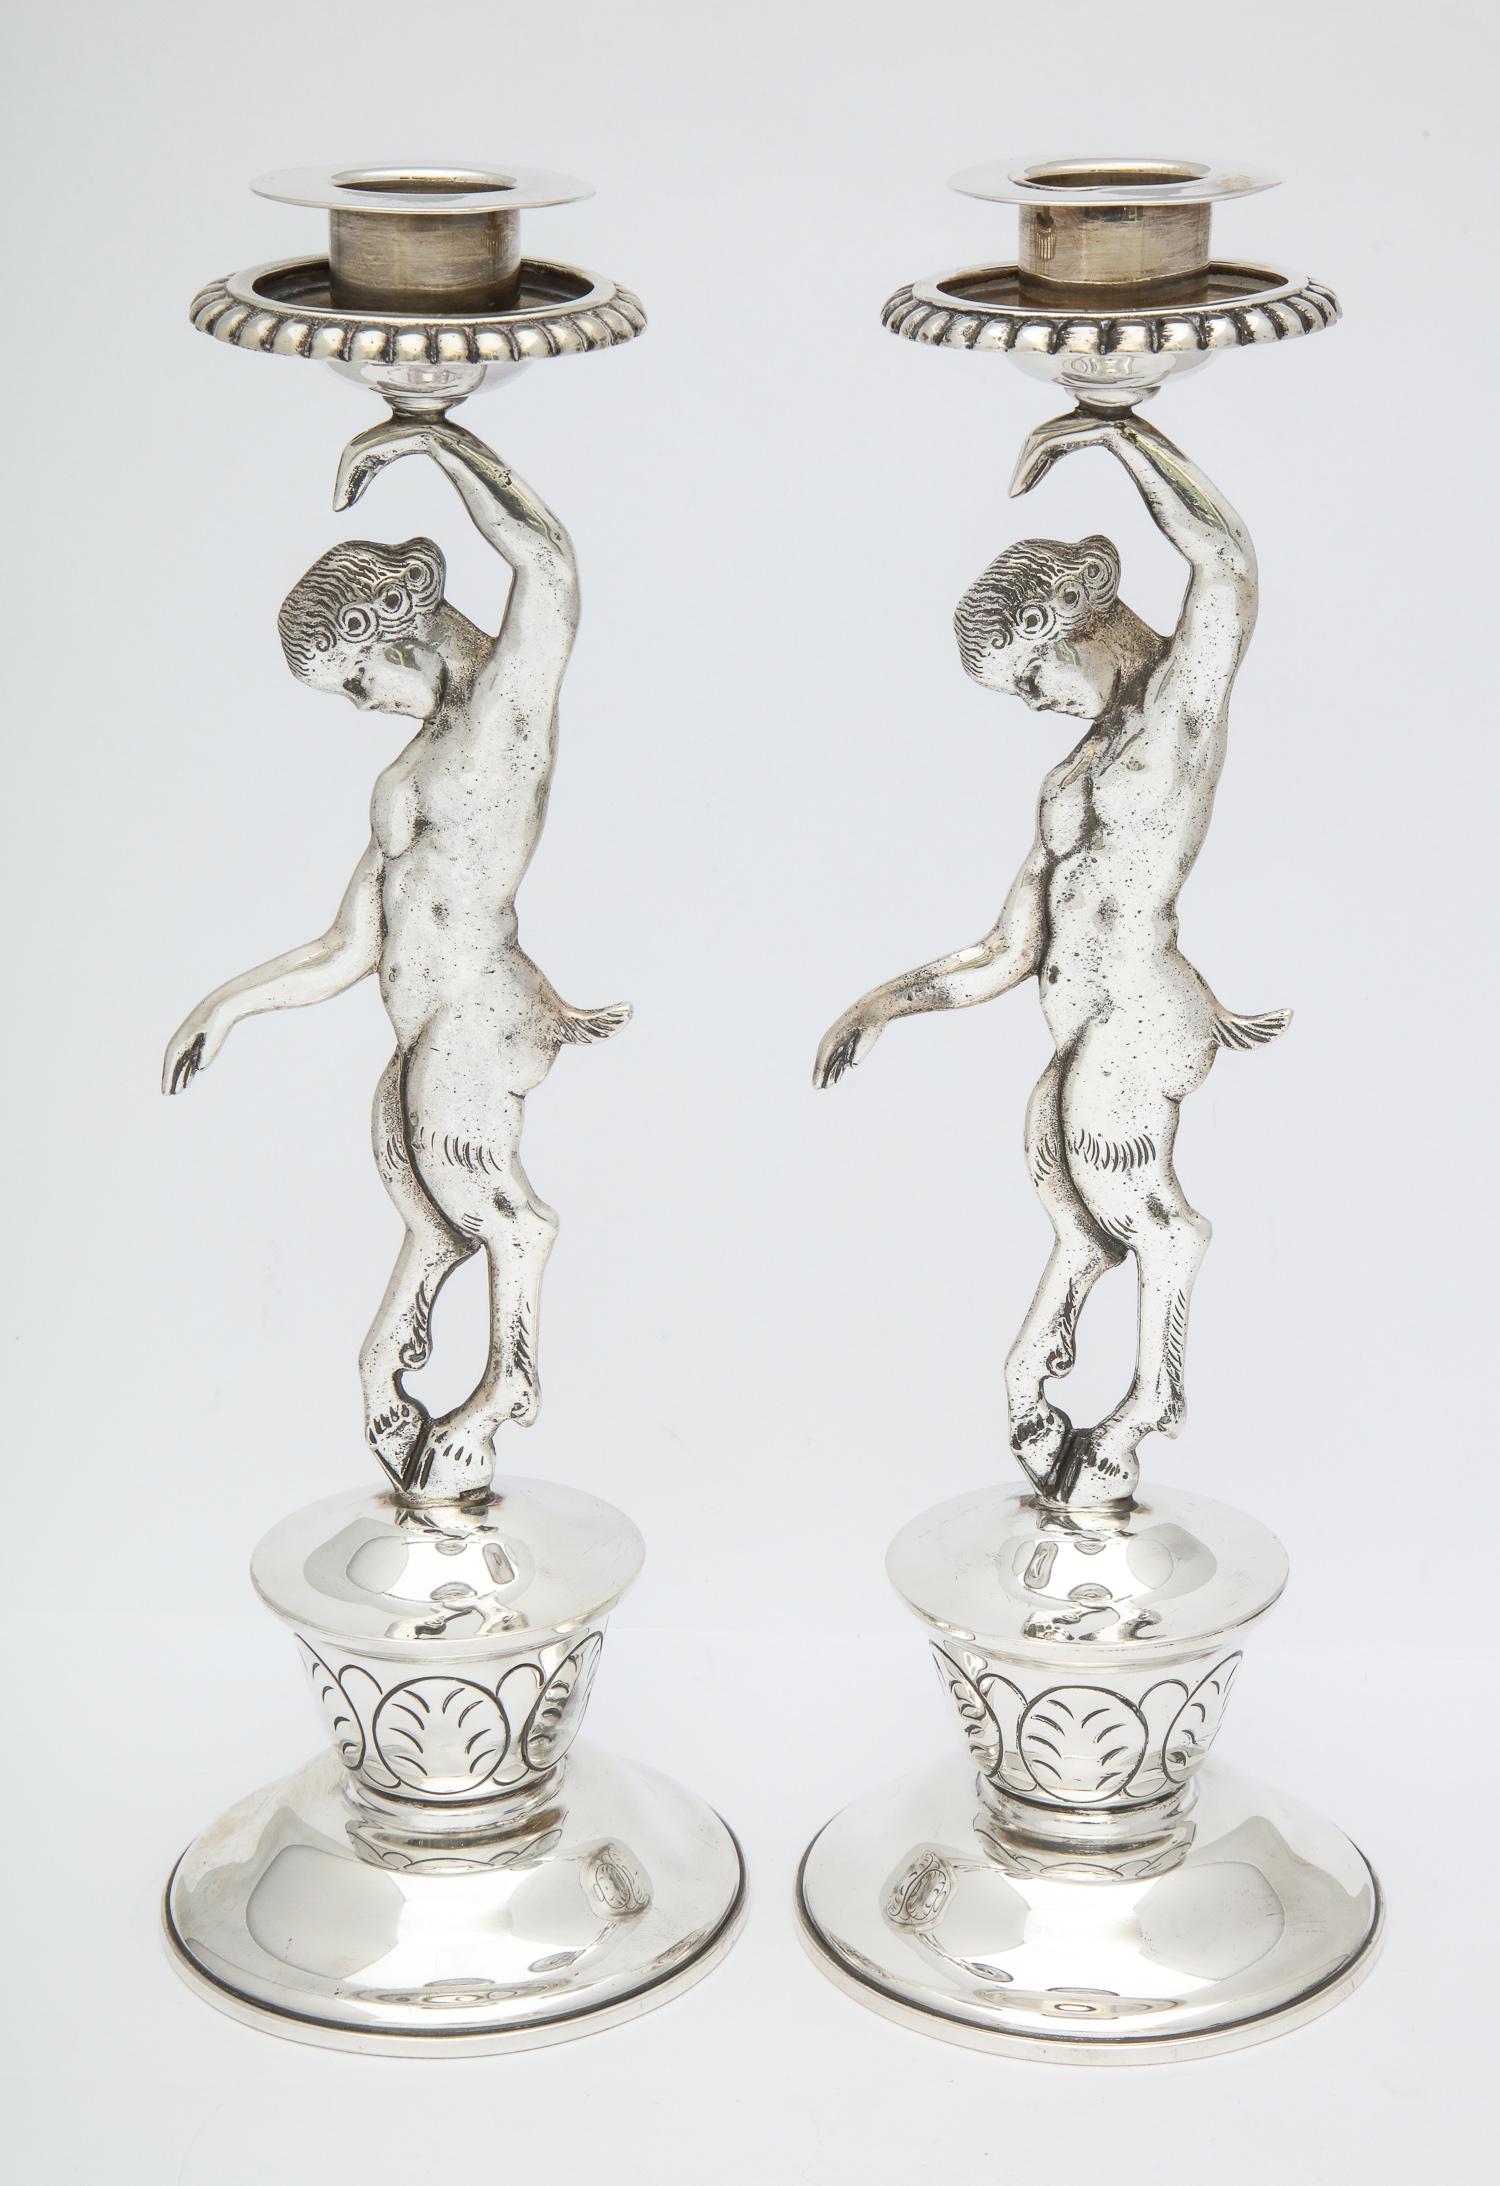 Neoclassical Rare Pair of Midcentury Sterling Silver Mexican Satyr-Form Candlesticks